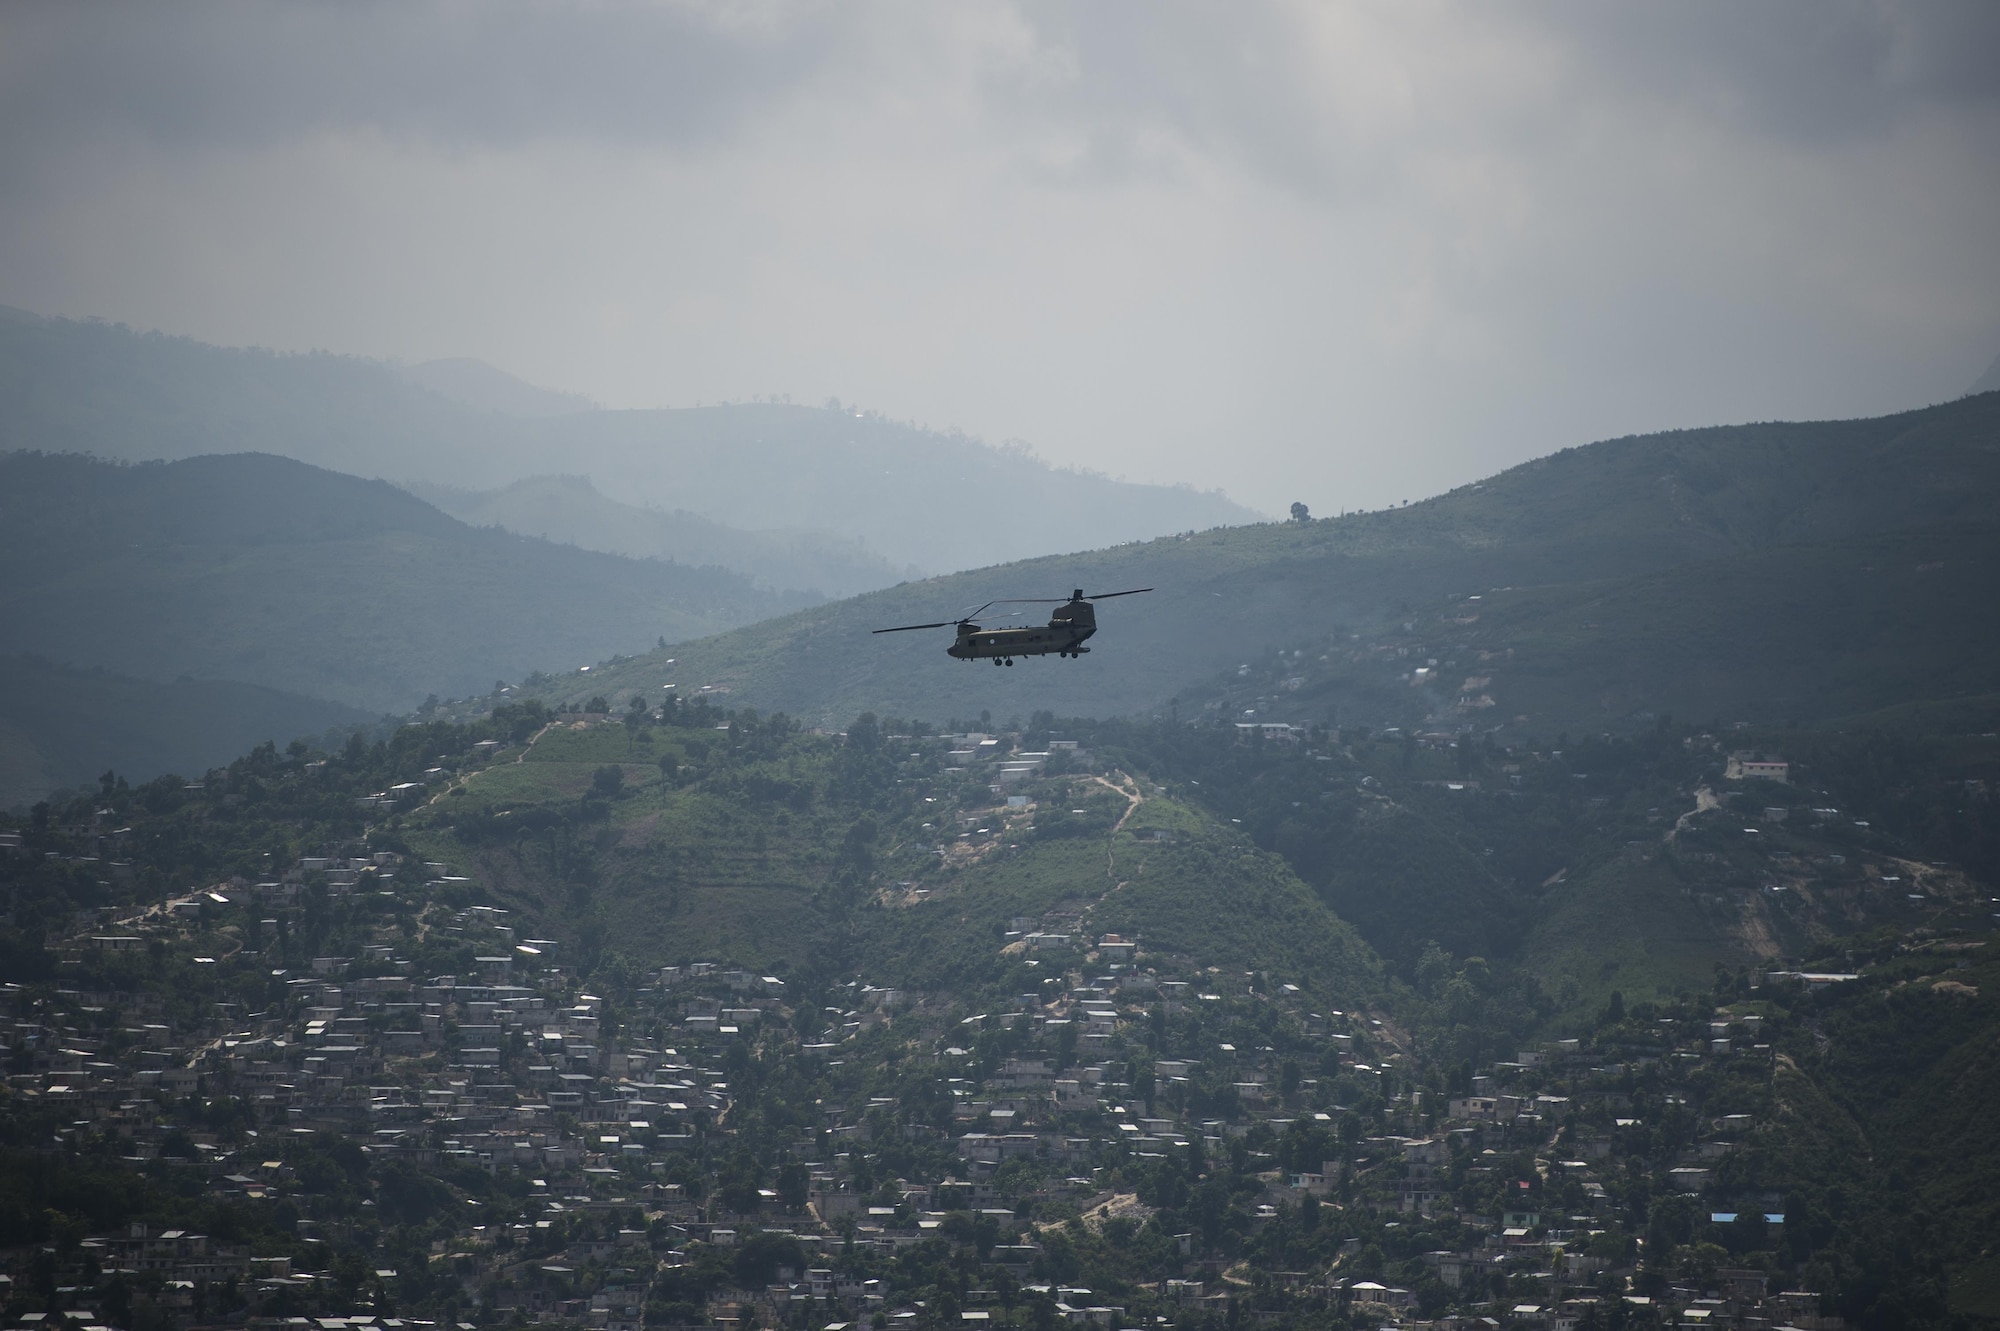 An Army CH-47 Chinook returns to Port-au-Prince, Haiti, Oct. 10, 2016. The aircraft delivered aid in support of Joint Task Force Matthew’s mission of providing humanitarian aid to those affected by Hurricane Matthew. (U.S. Air Force photo/Tech. Sgt. Russ Scalf)